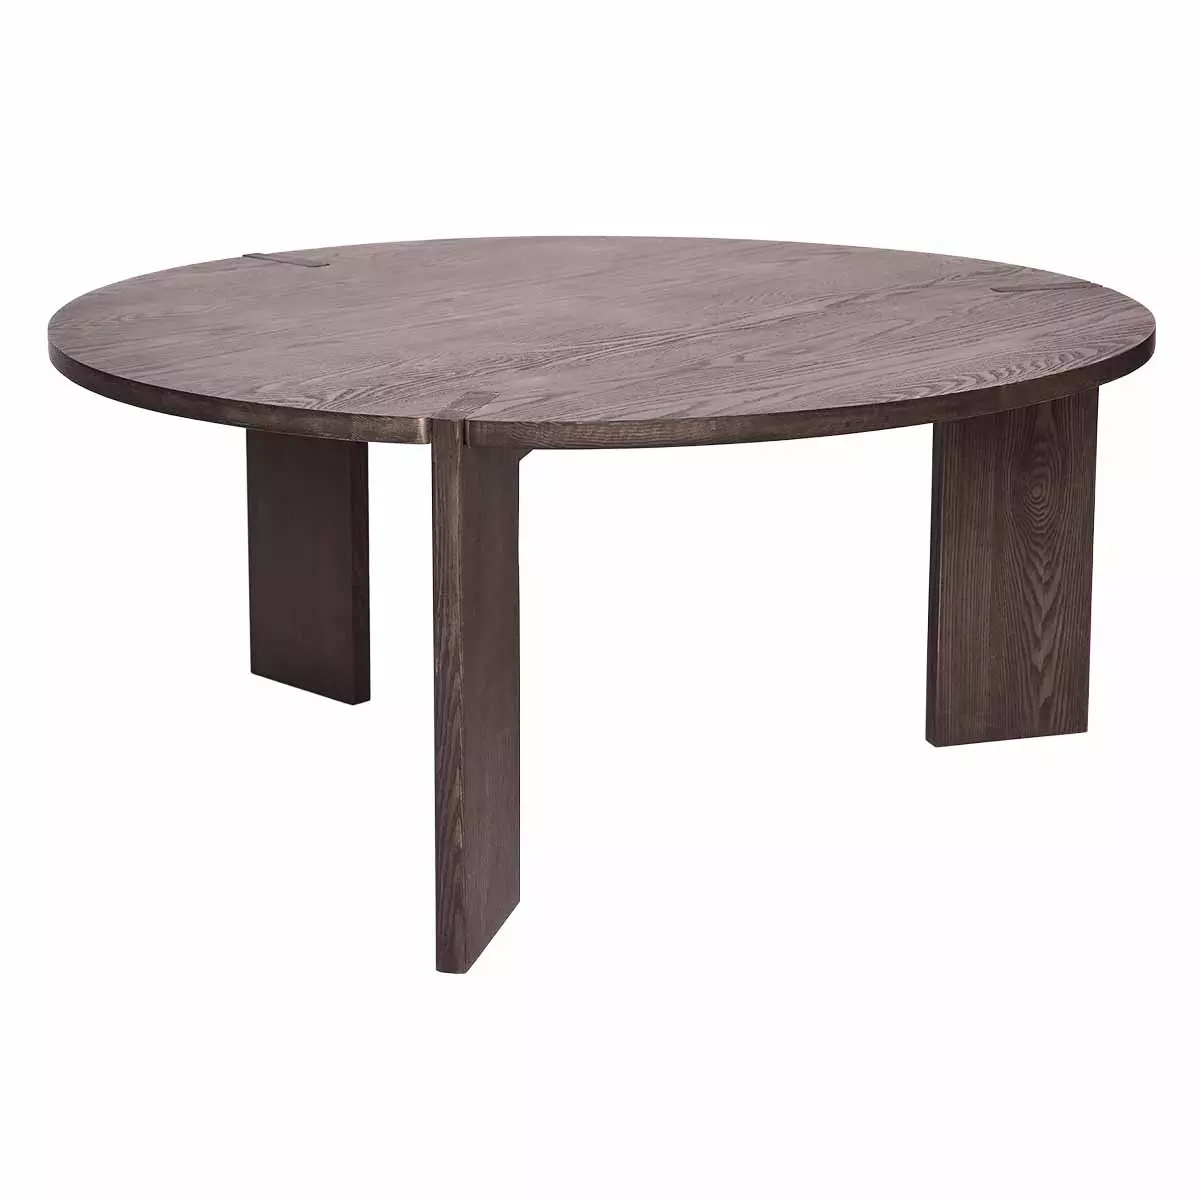 Oyoy Living Oy Coffee Table Large